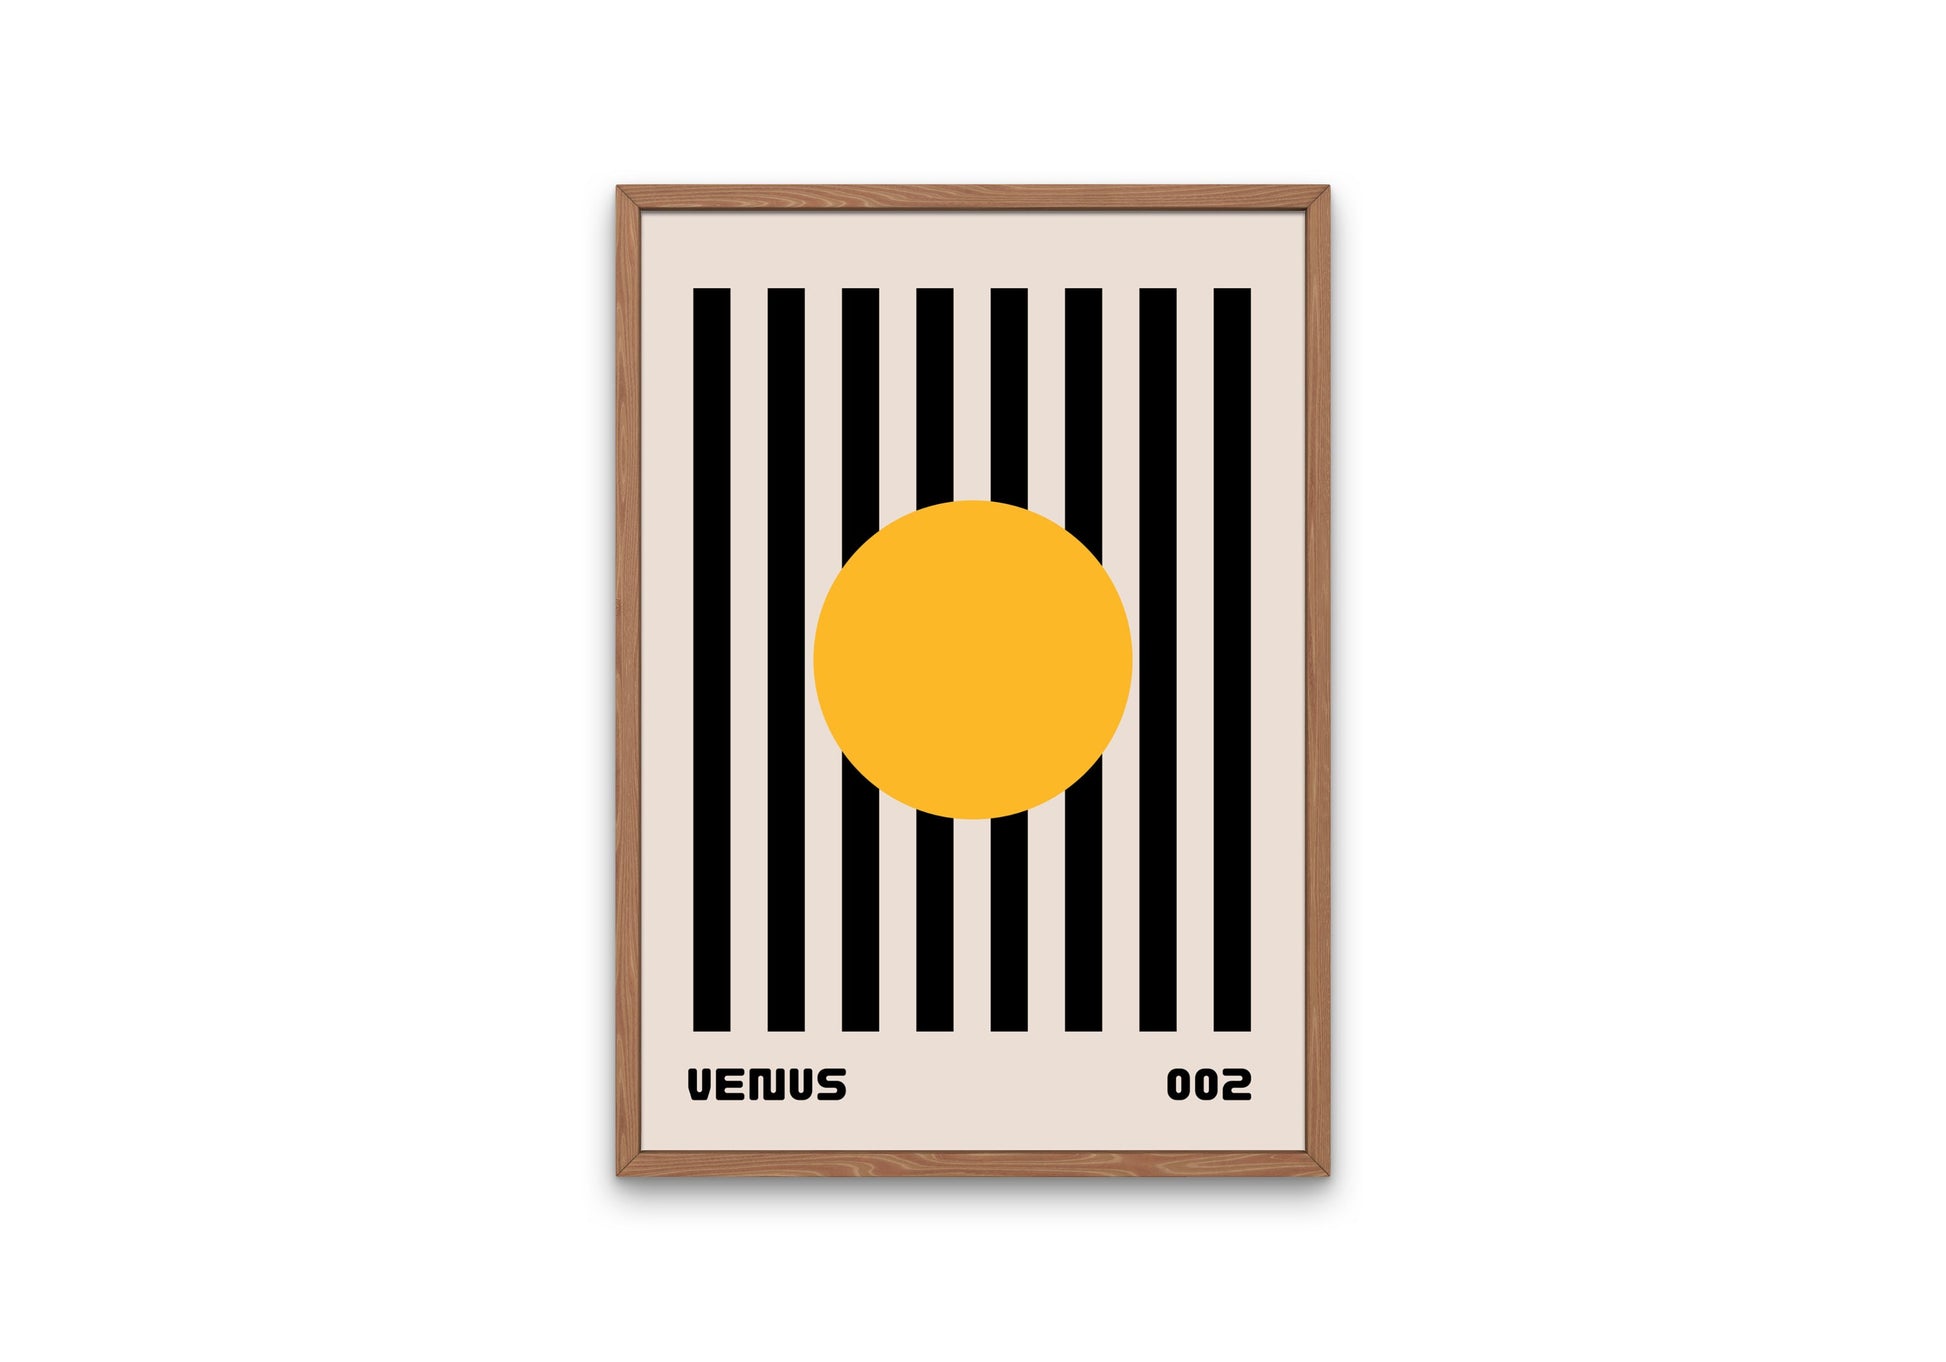 Venus poster INSTANT DOWNLOAD, solar system poster, indie room décor, astronomy poster, vintage astronomy, space poster, Bauhaus minimal